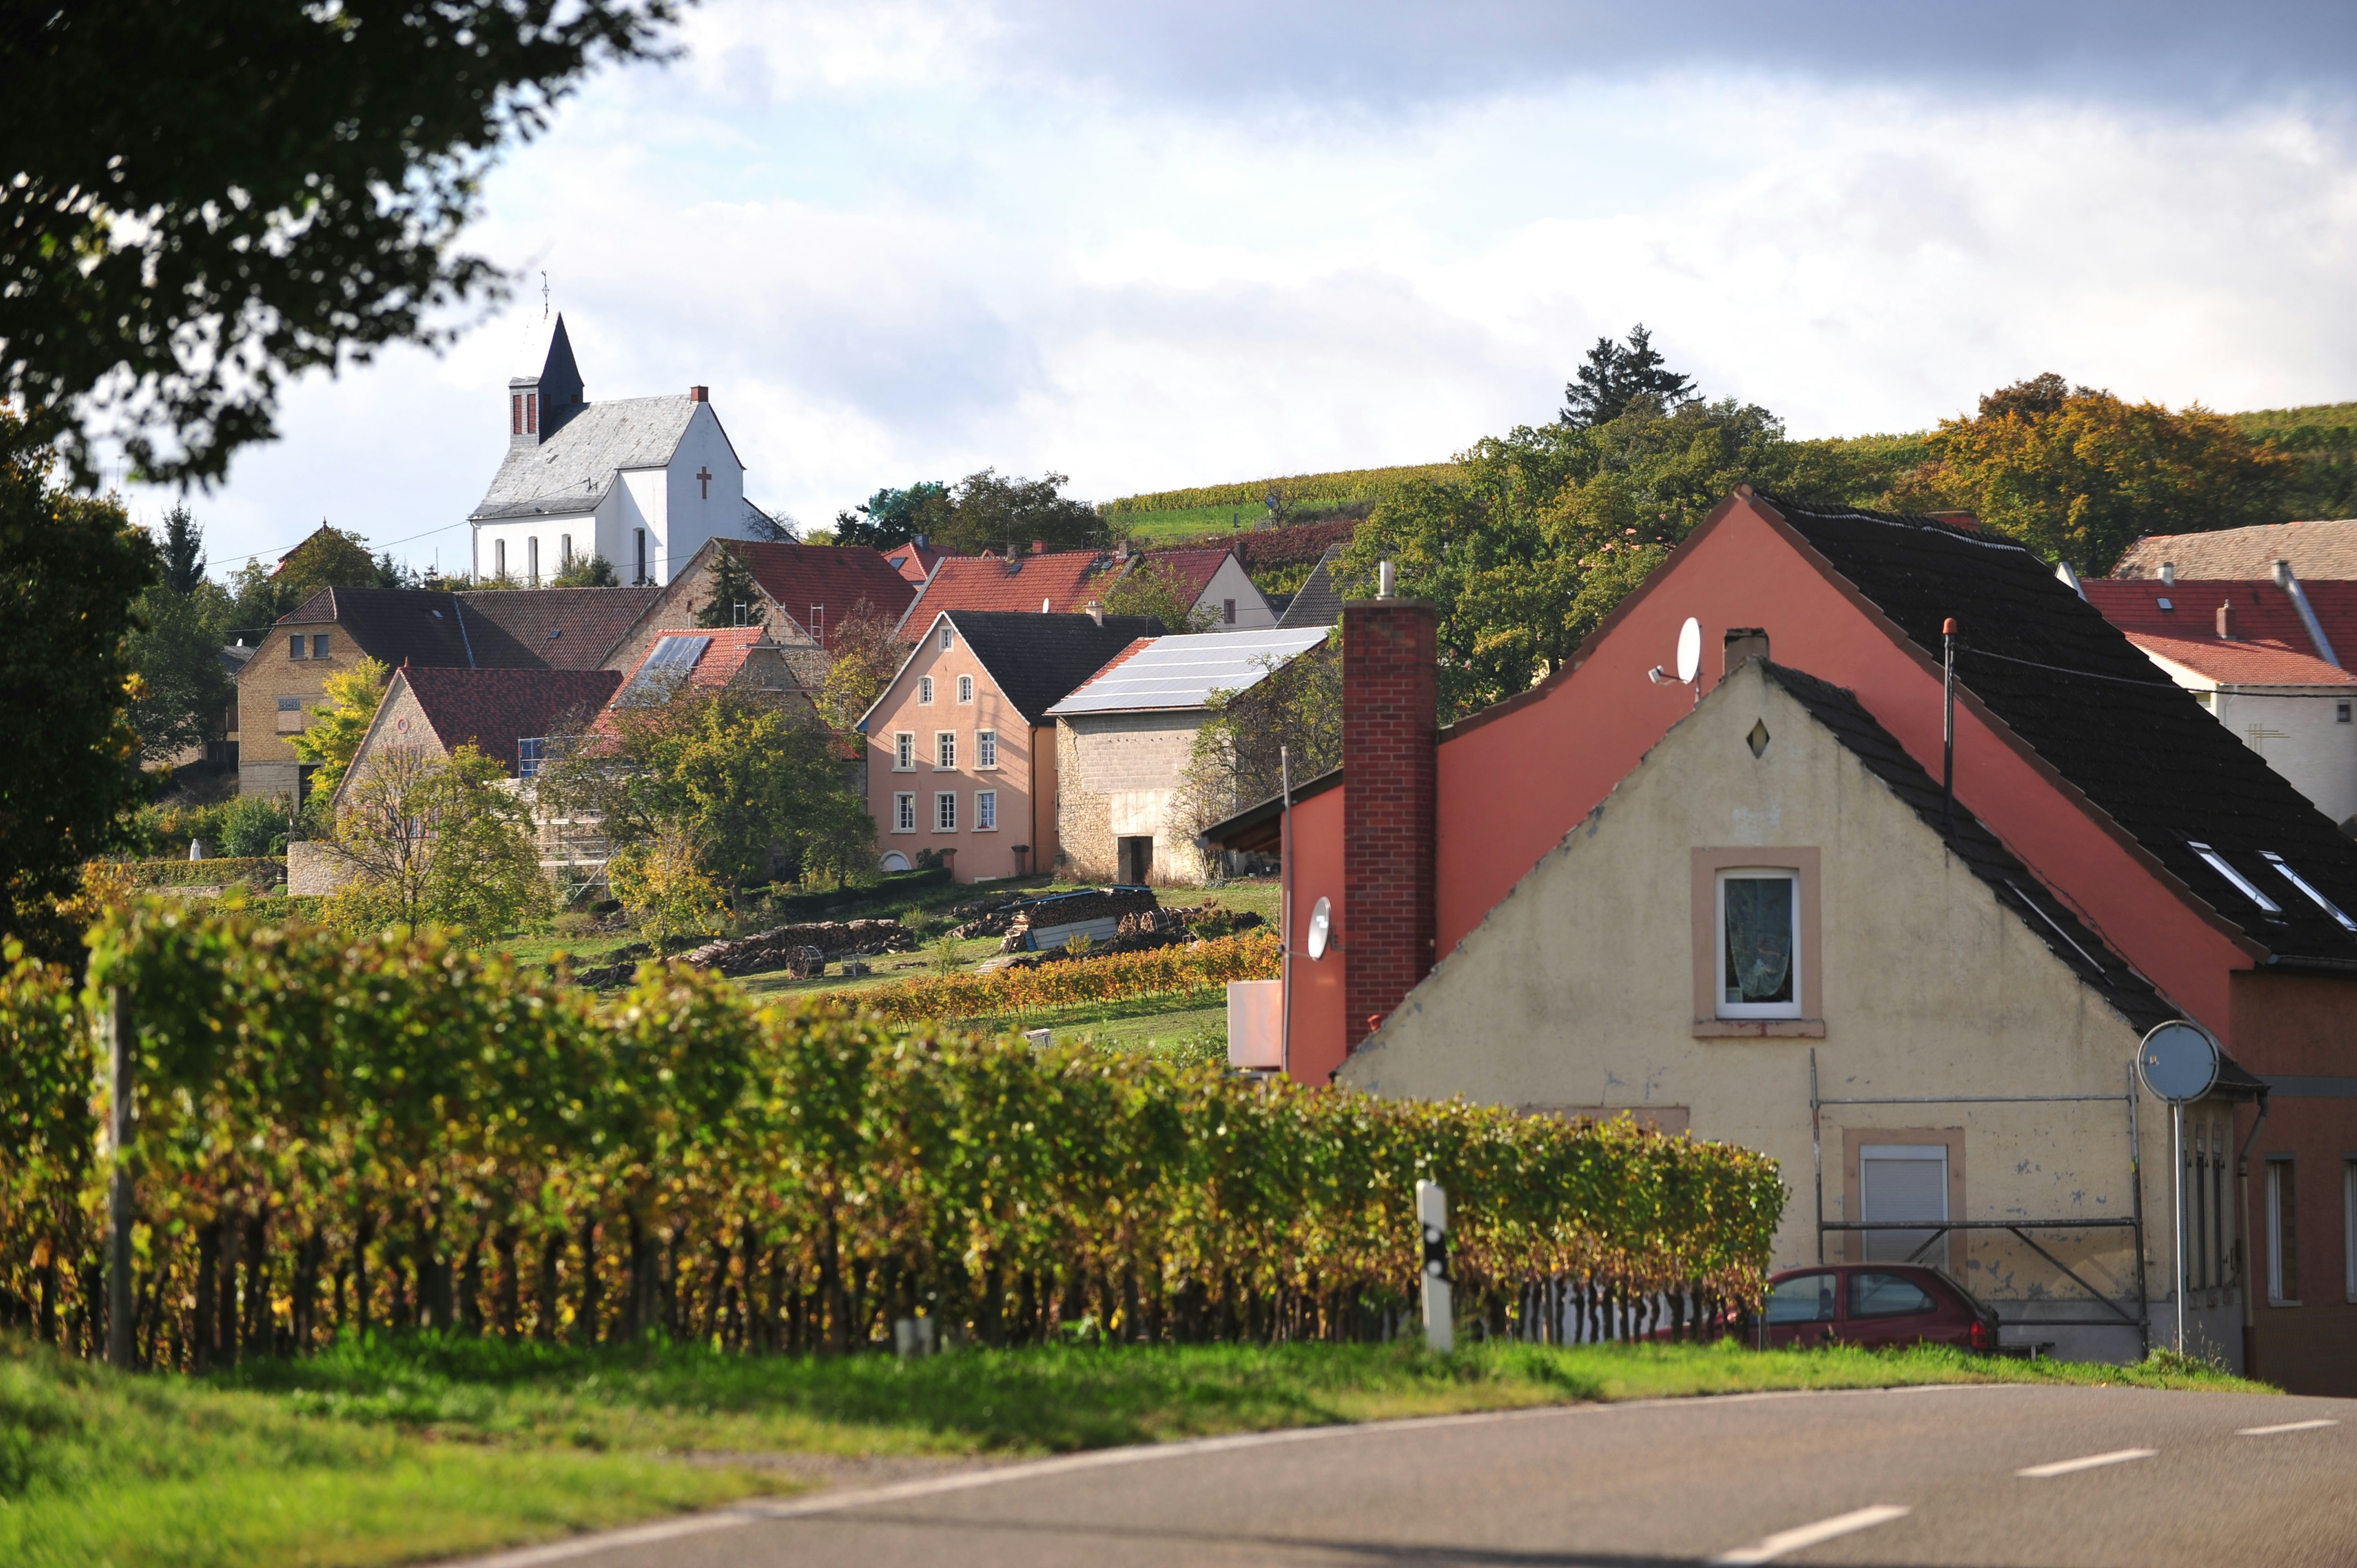 The picturesque town of Zell is shown with a strip of road in the immediate forground, followed by rows of grapevines just out of focus. Behind the vines are old brick houses with three rows of windows and black roofs, one with solar panels on top. Dominating the frame is a white church with a dark steeple far up on the hillside.